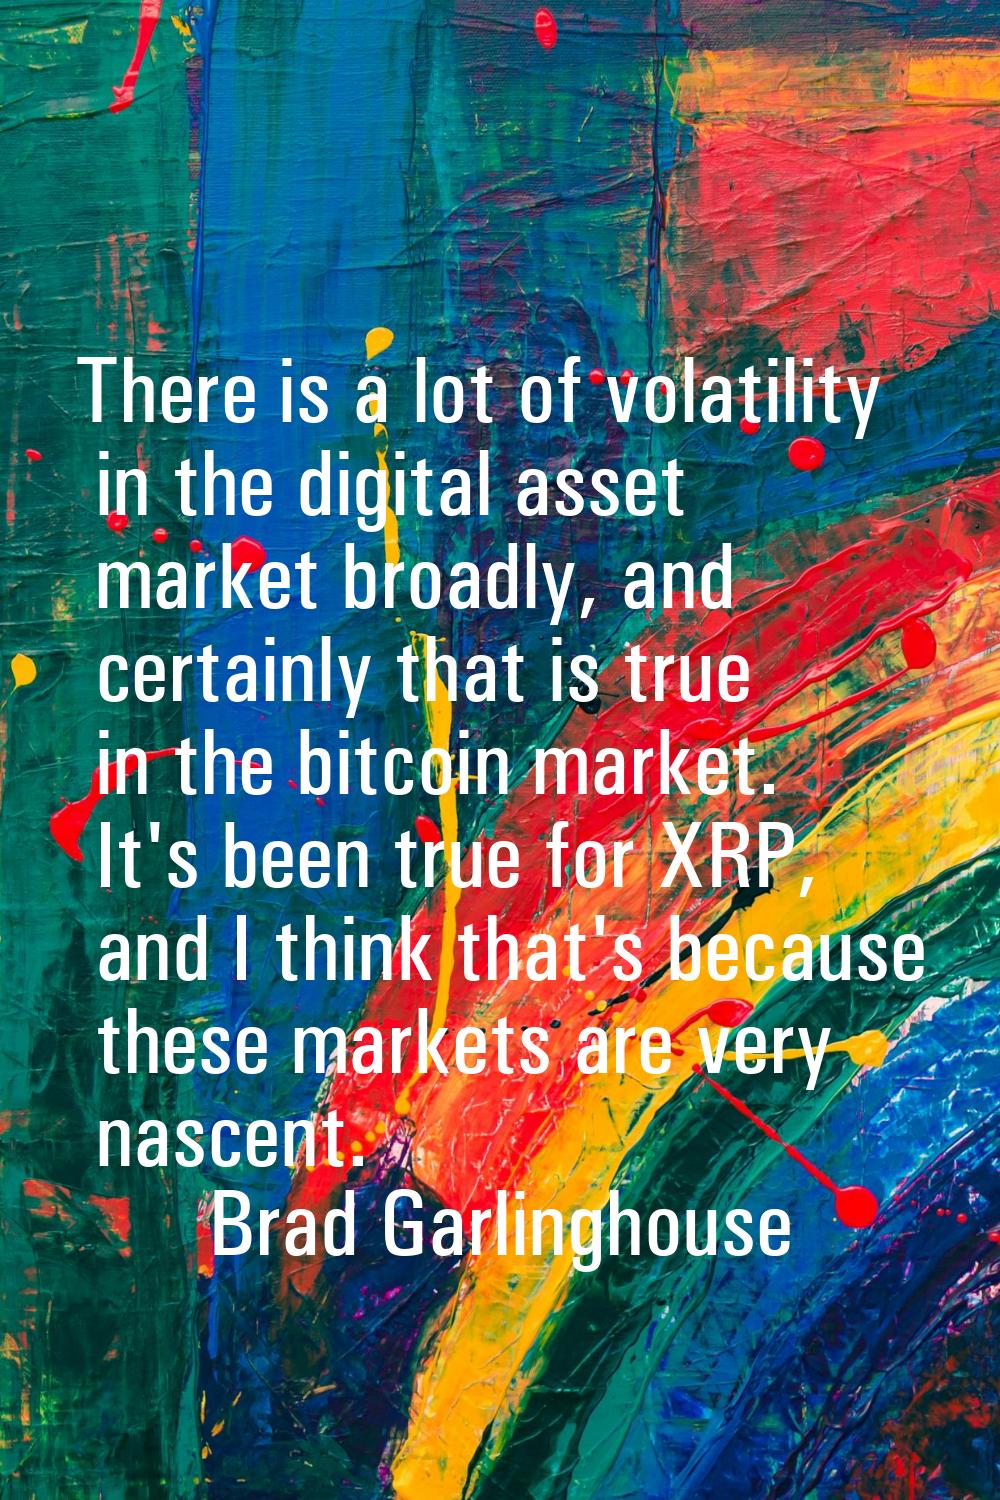 There is a lot of volatility in the digital asset market broadly, and certainly that is true in the